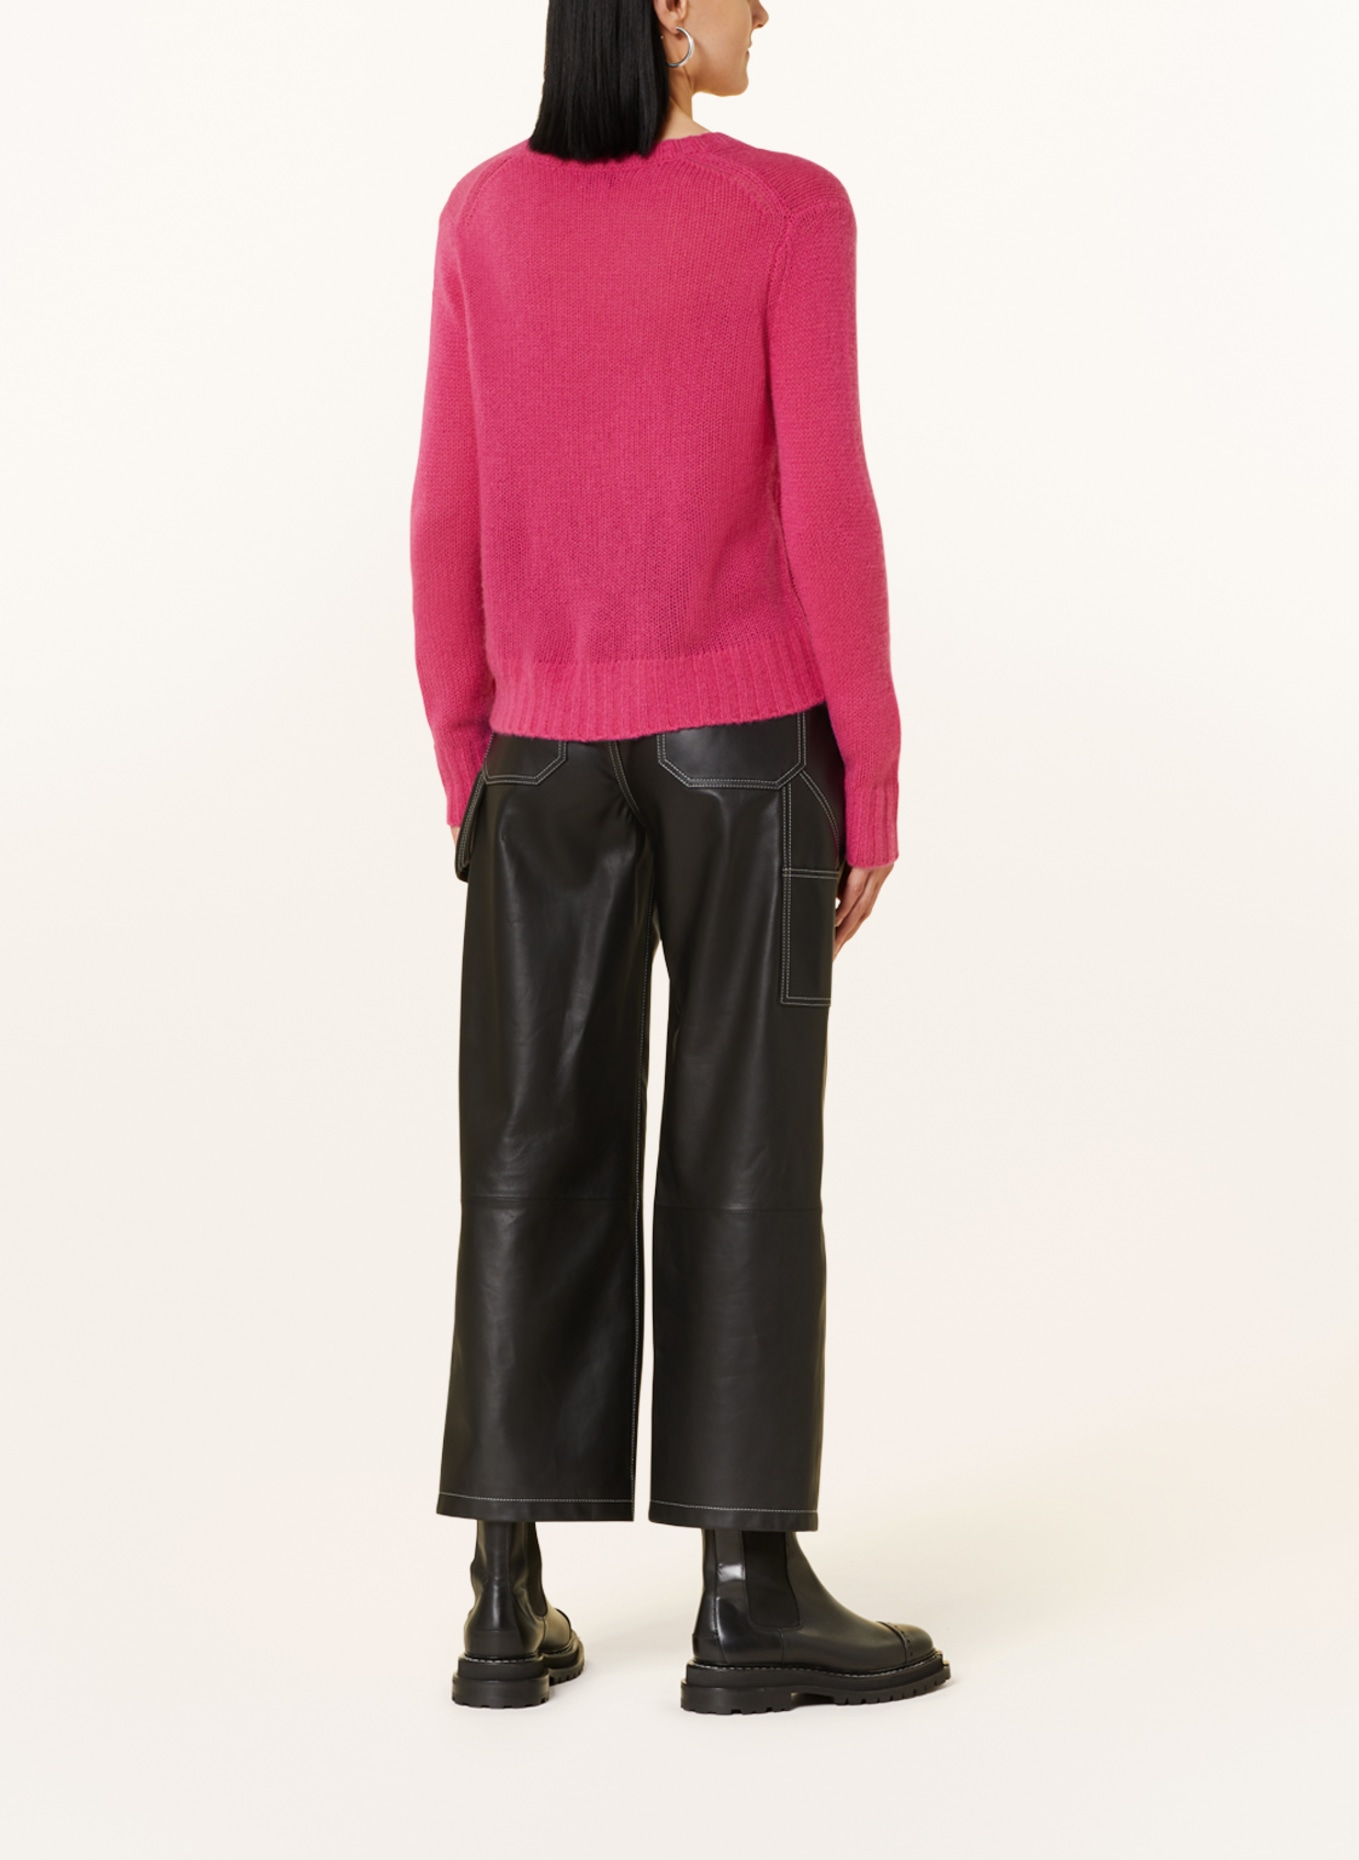 MRS & HUGS Cashmere sweater, Color: PINK (Image 3)